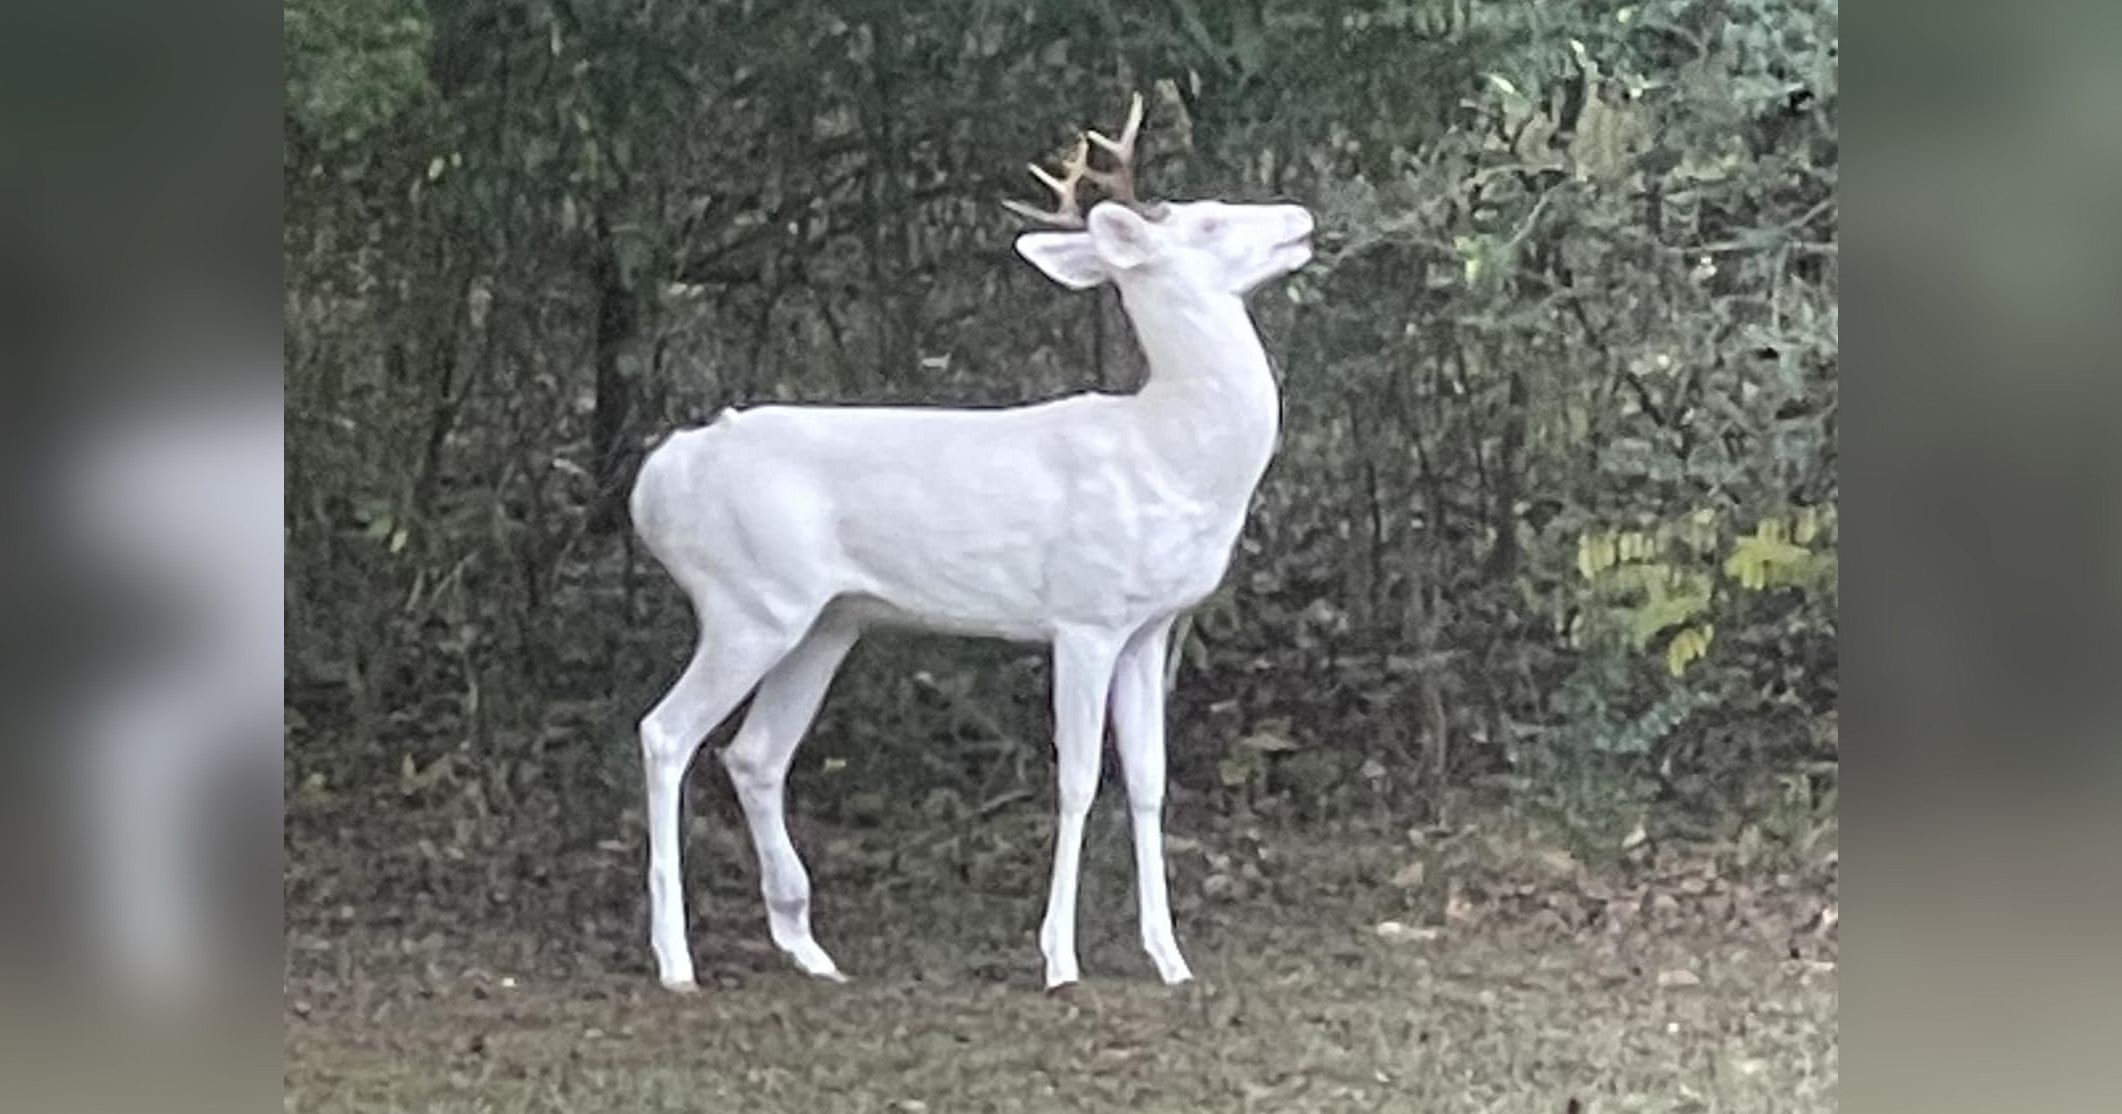 Extremely rare “ghost of the forest” albino deer spotted in Tennessee